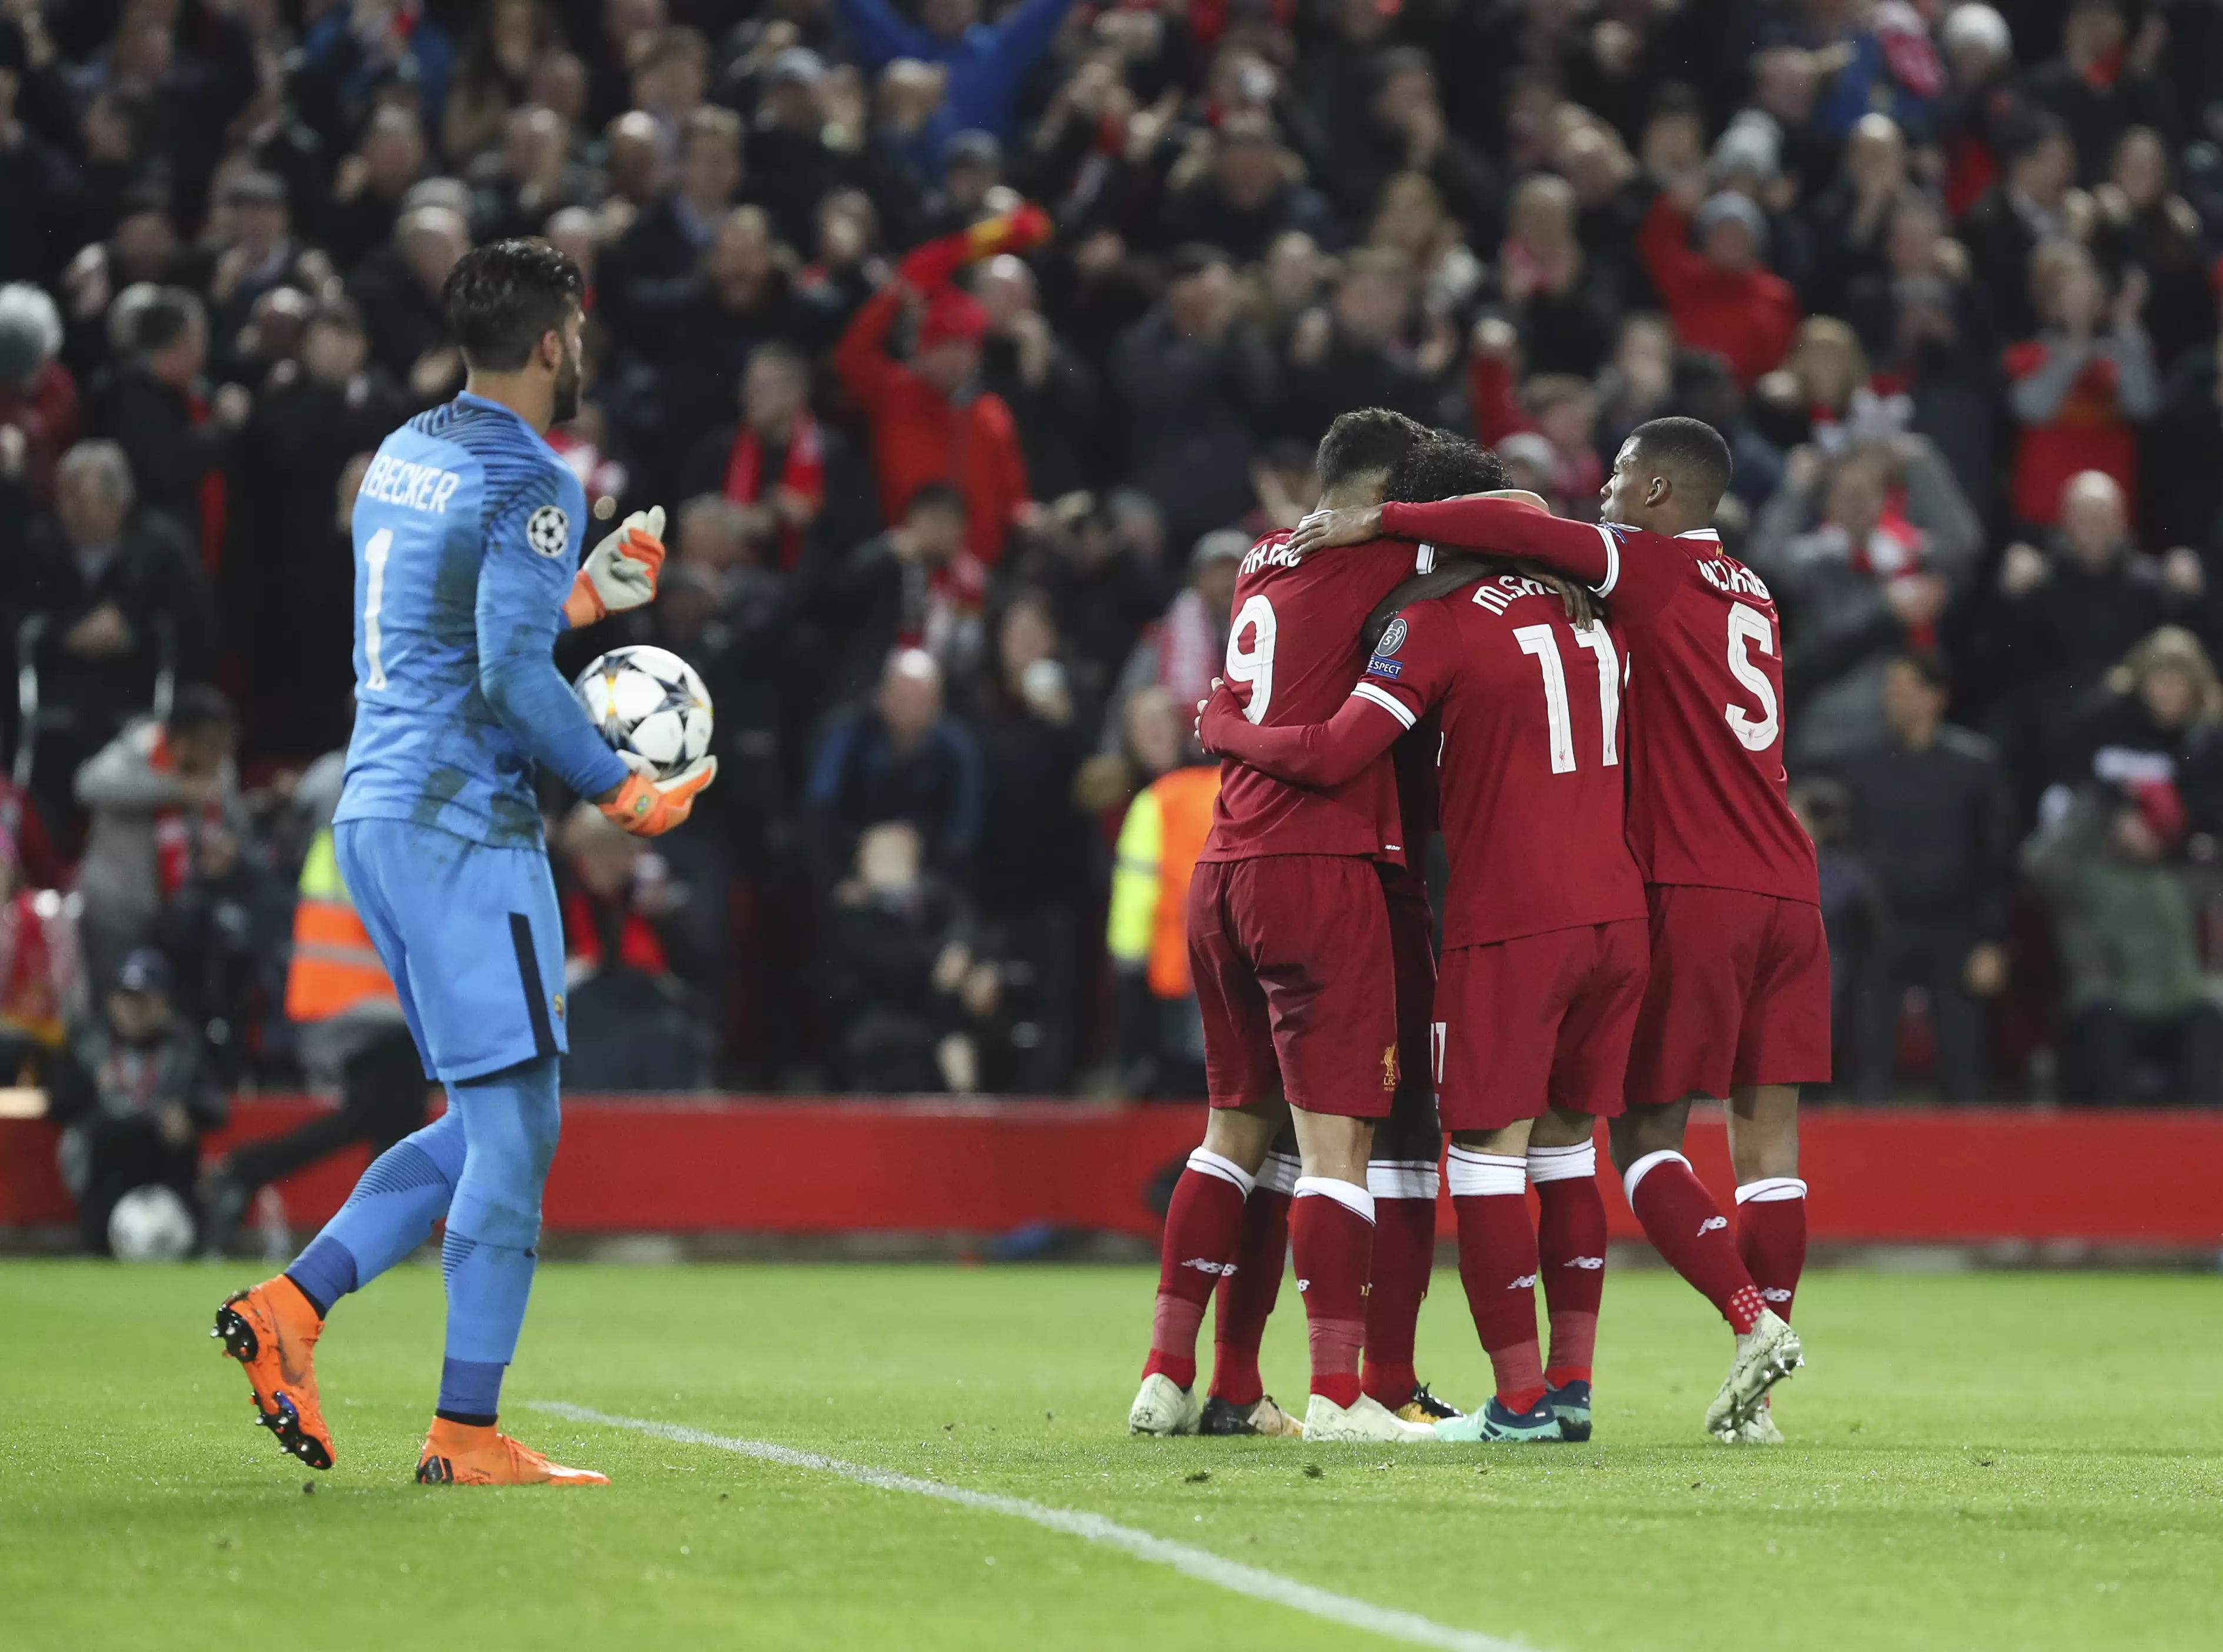 Liverpool players celebrate another goal past Roma. Image: PA Images